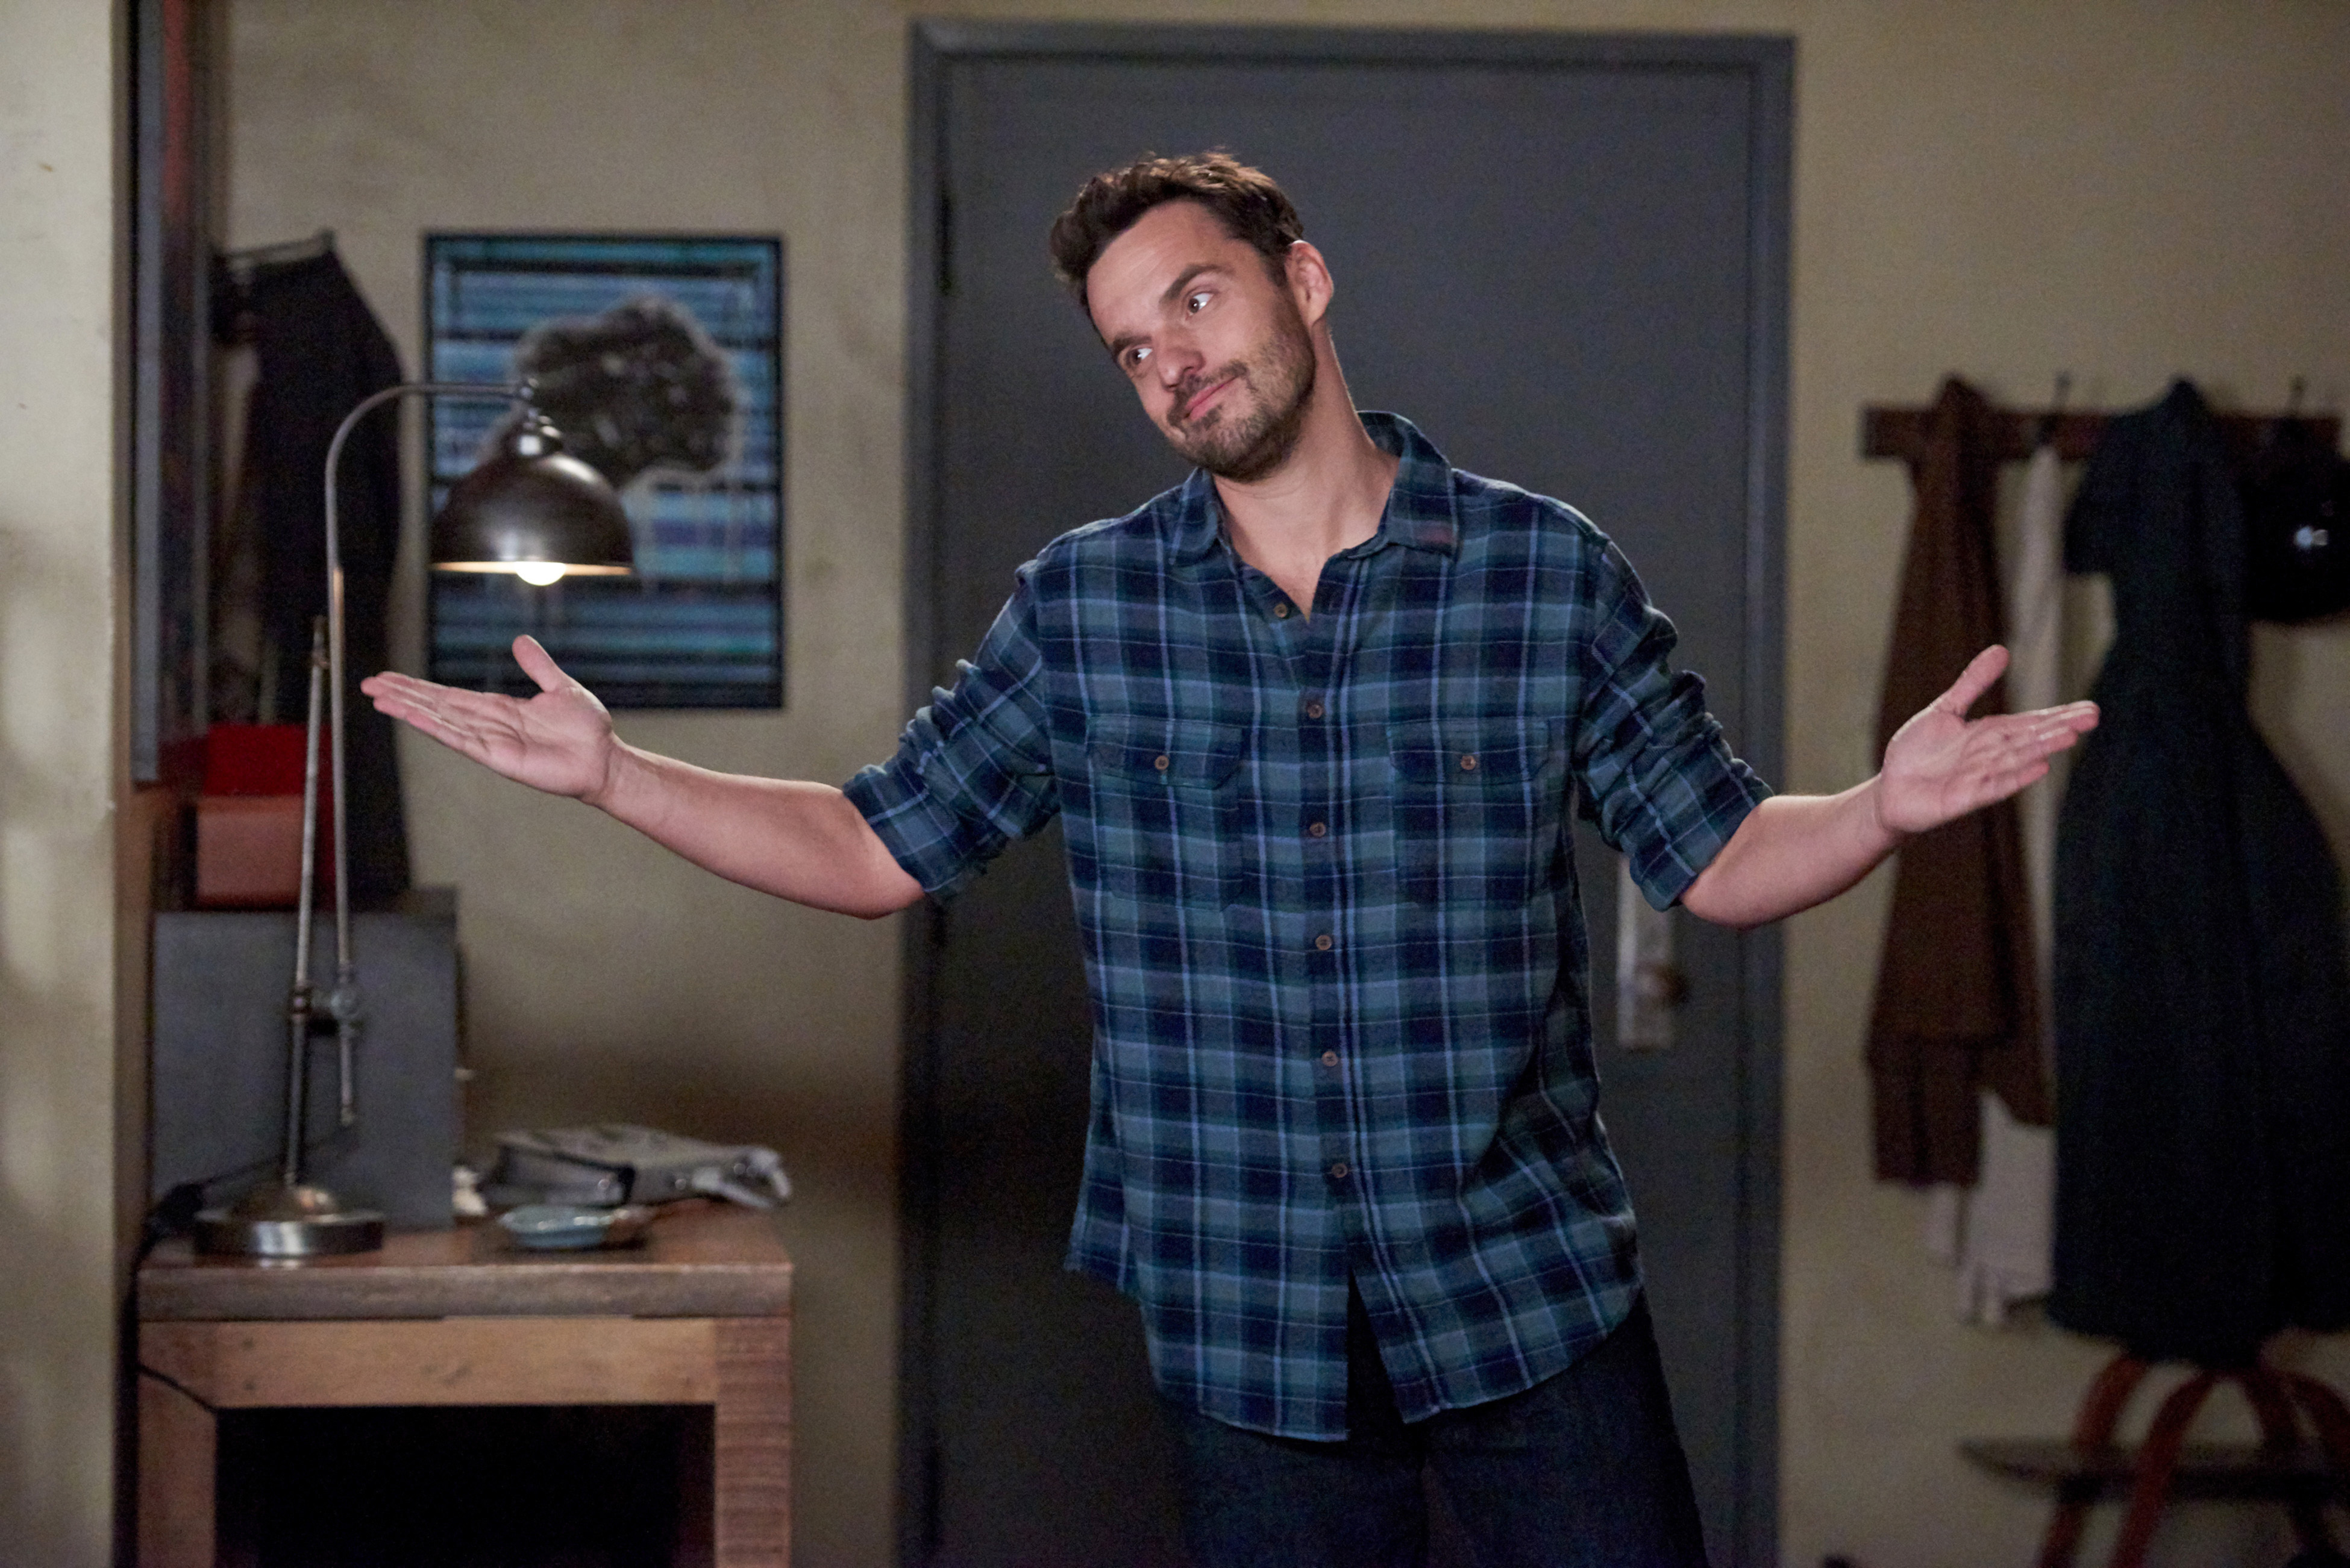 Nick Miller from New Girl in a plaid shirt, shrugging with a questioning expression in an apartment